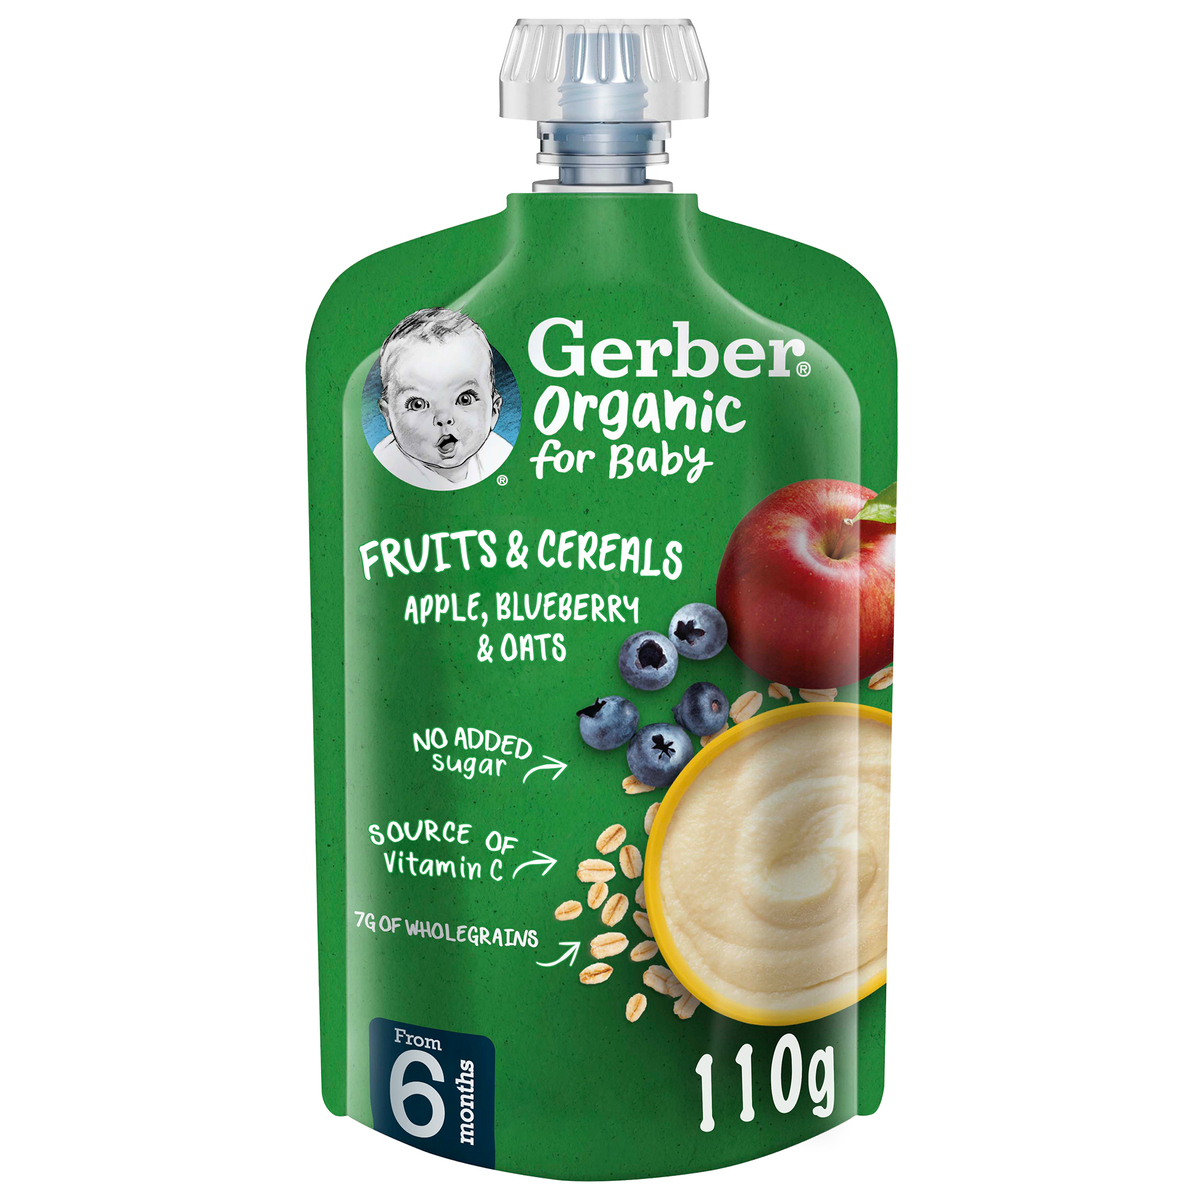 Gerber Organic Apple Blueberry & Oats Fruits & Cereals For Baby From, 6 Months, 110 g